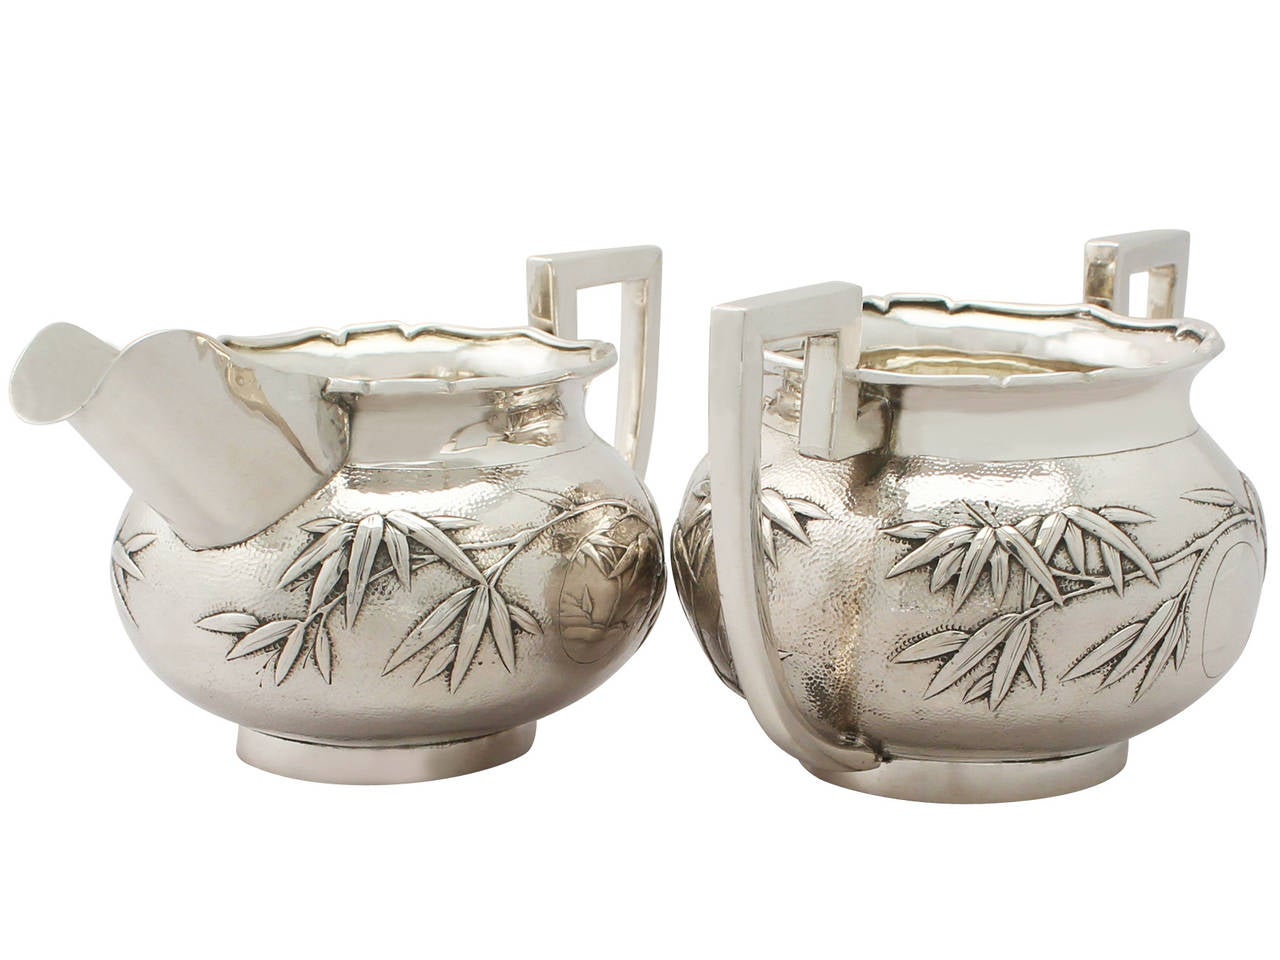 Antique Chinese Export Silver Cream Jug / Creamer and Sugar Bowl In Excellent Condition For Sale In Jesmond, Newcastle Upon Tyne